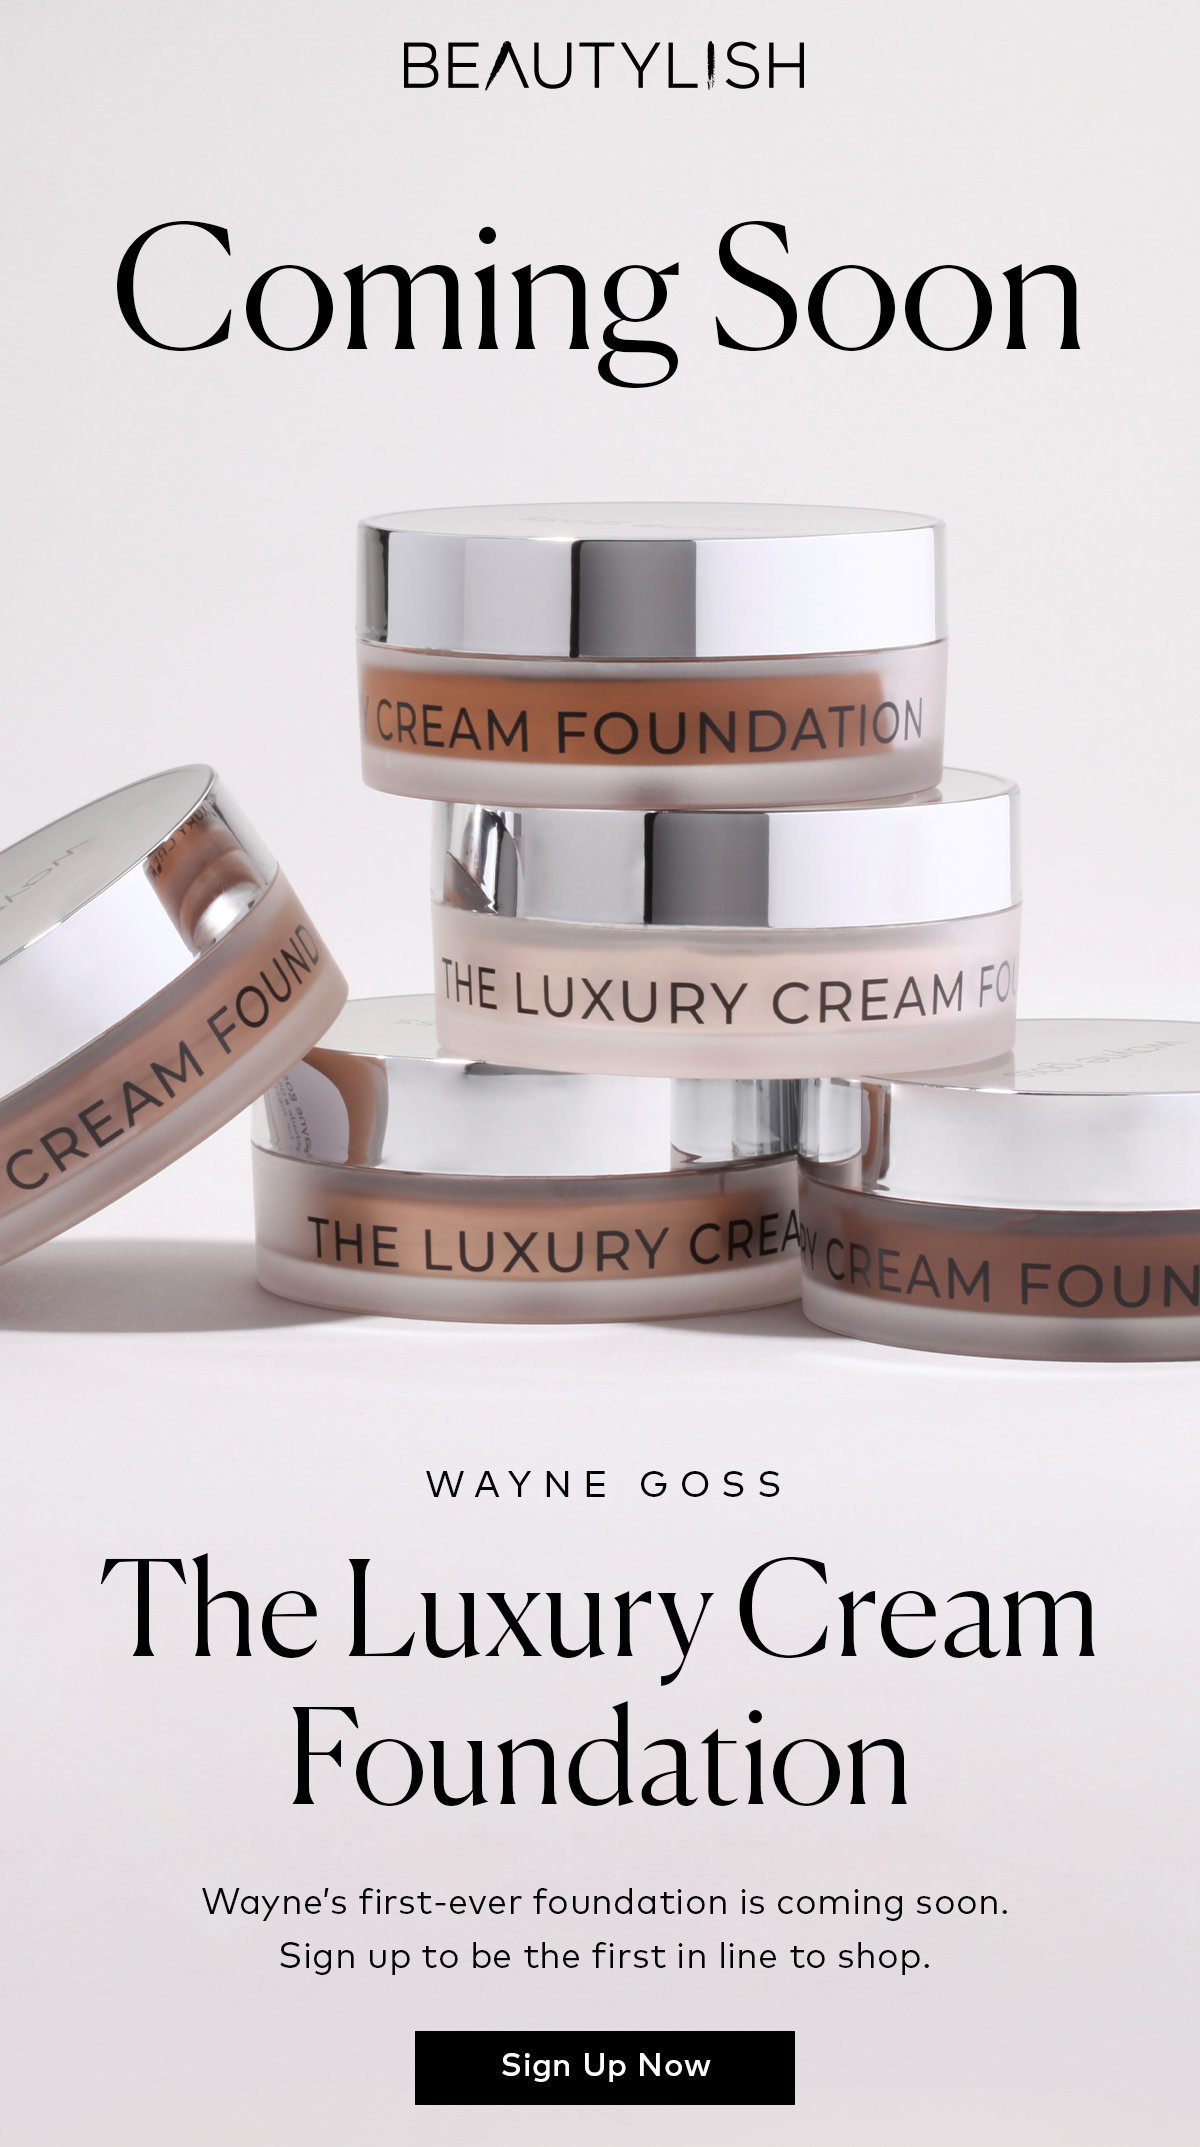 Sign up to be the first in line to shop Wayne Goss's Luxury Cream Foundation on Beautylish.com BEAUTYLISH Coming Soon HE Luxu RY CREAMF WAYNE GOSS The Luxury Cream FOundaon Sign Up Now 